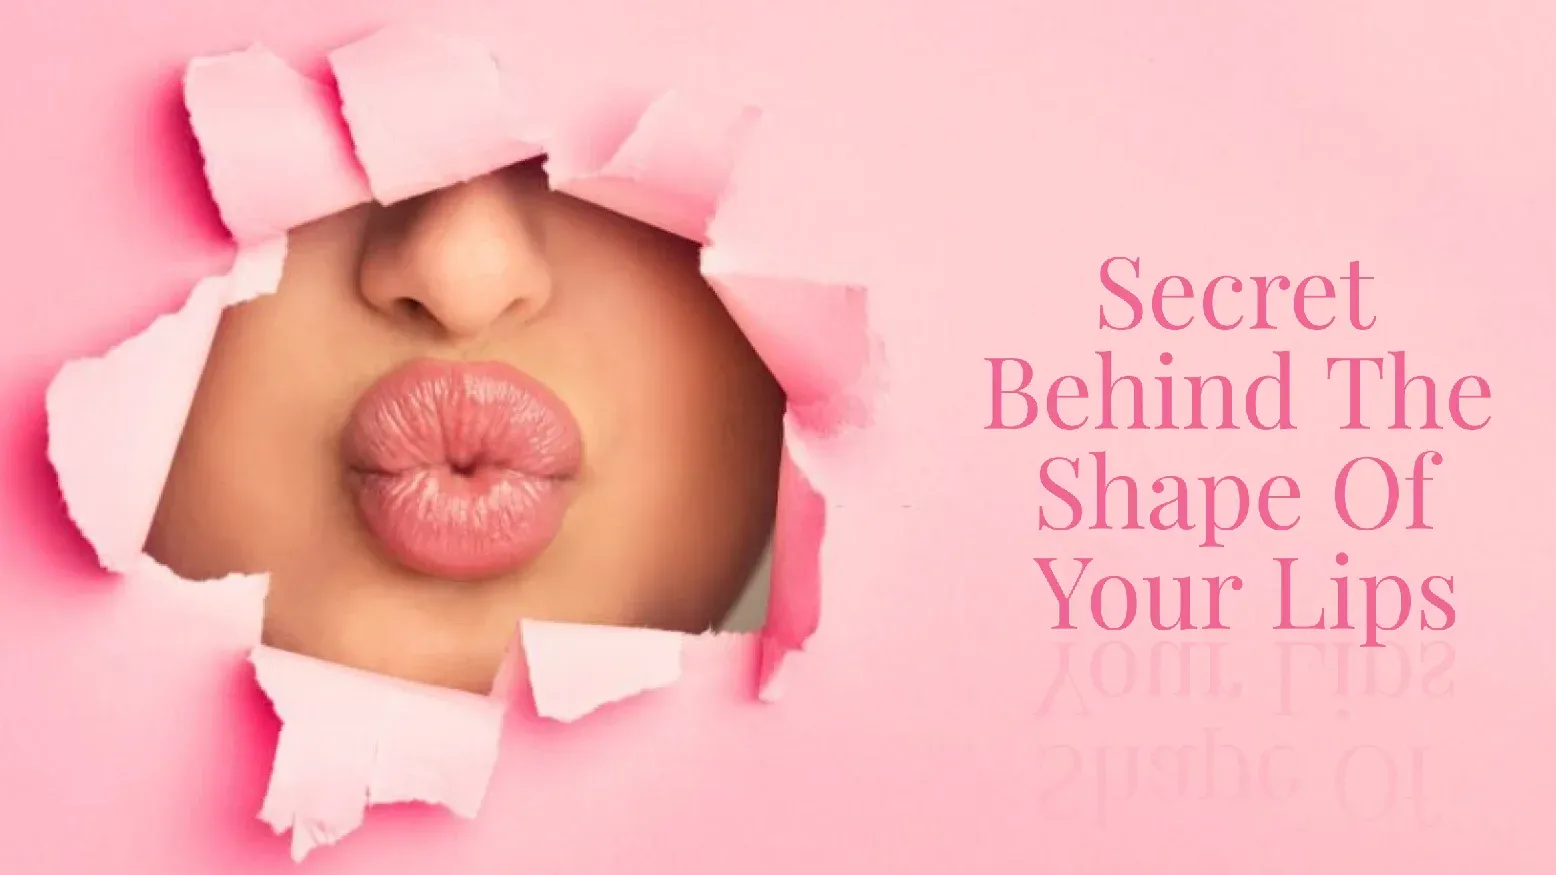 Know The Secret Behind The Shape Of Your Lips